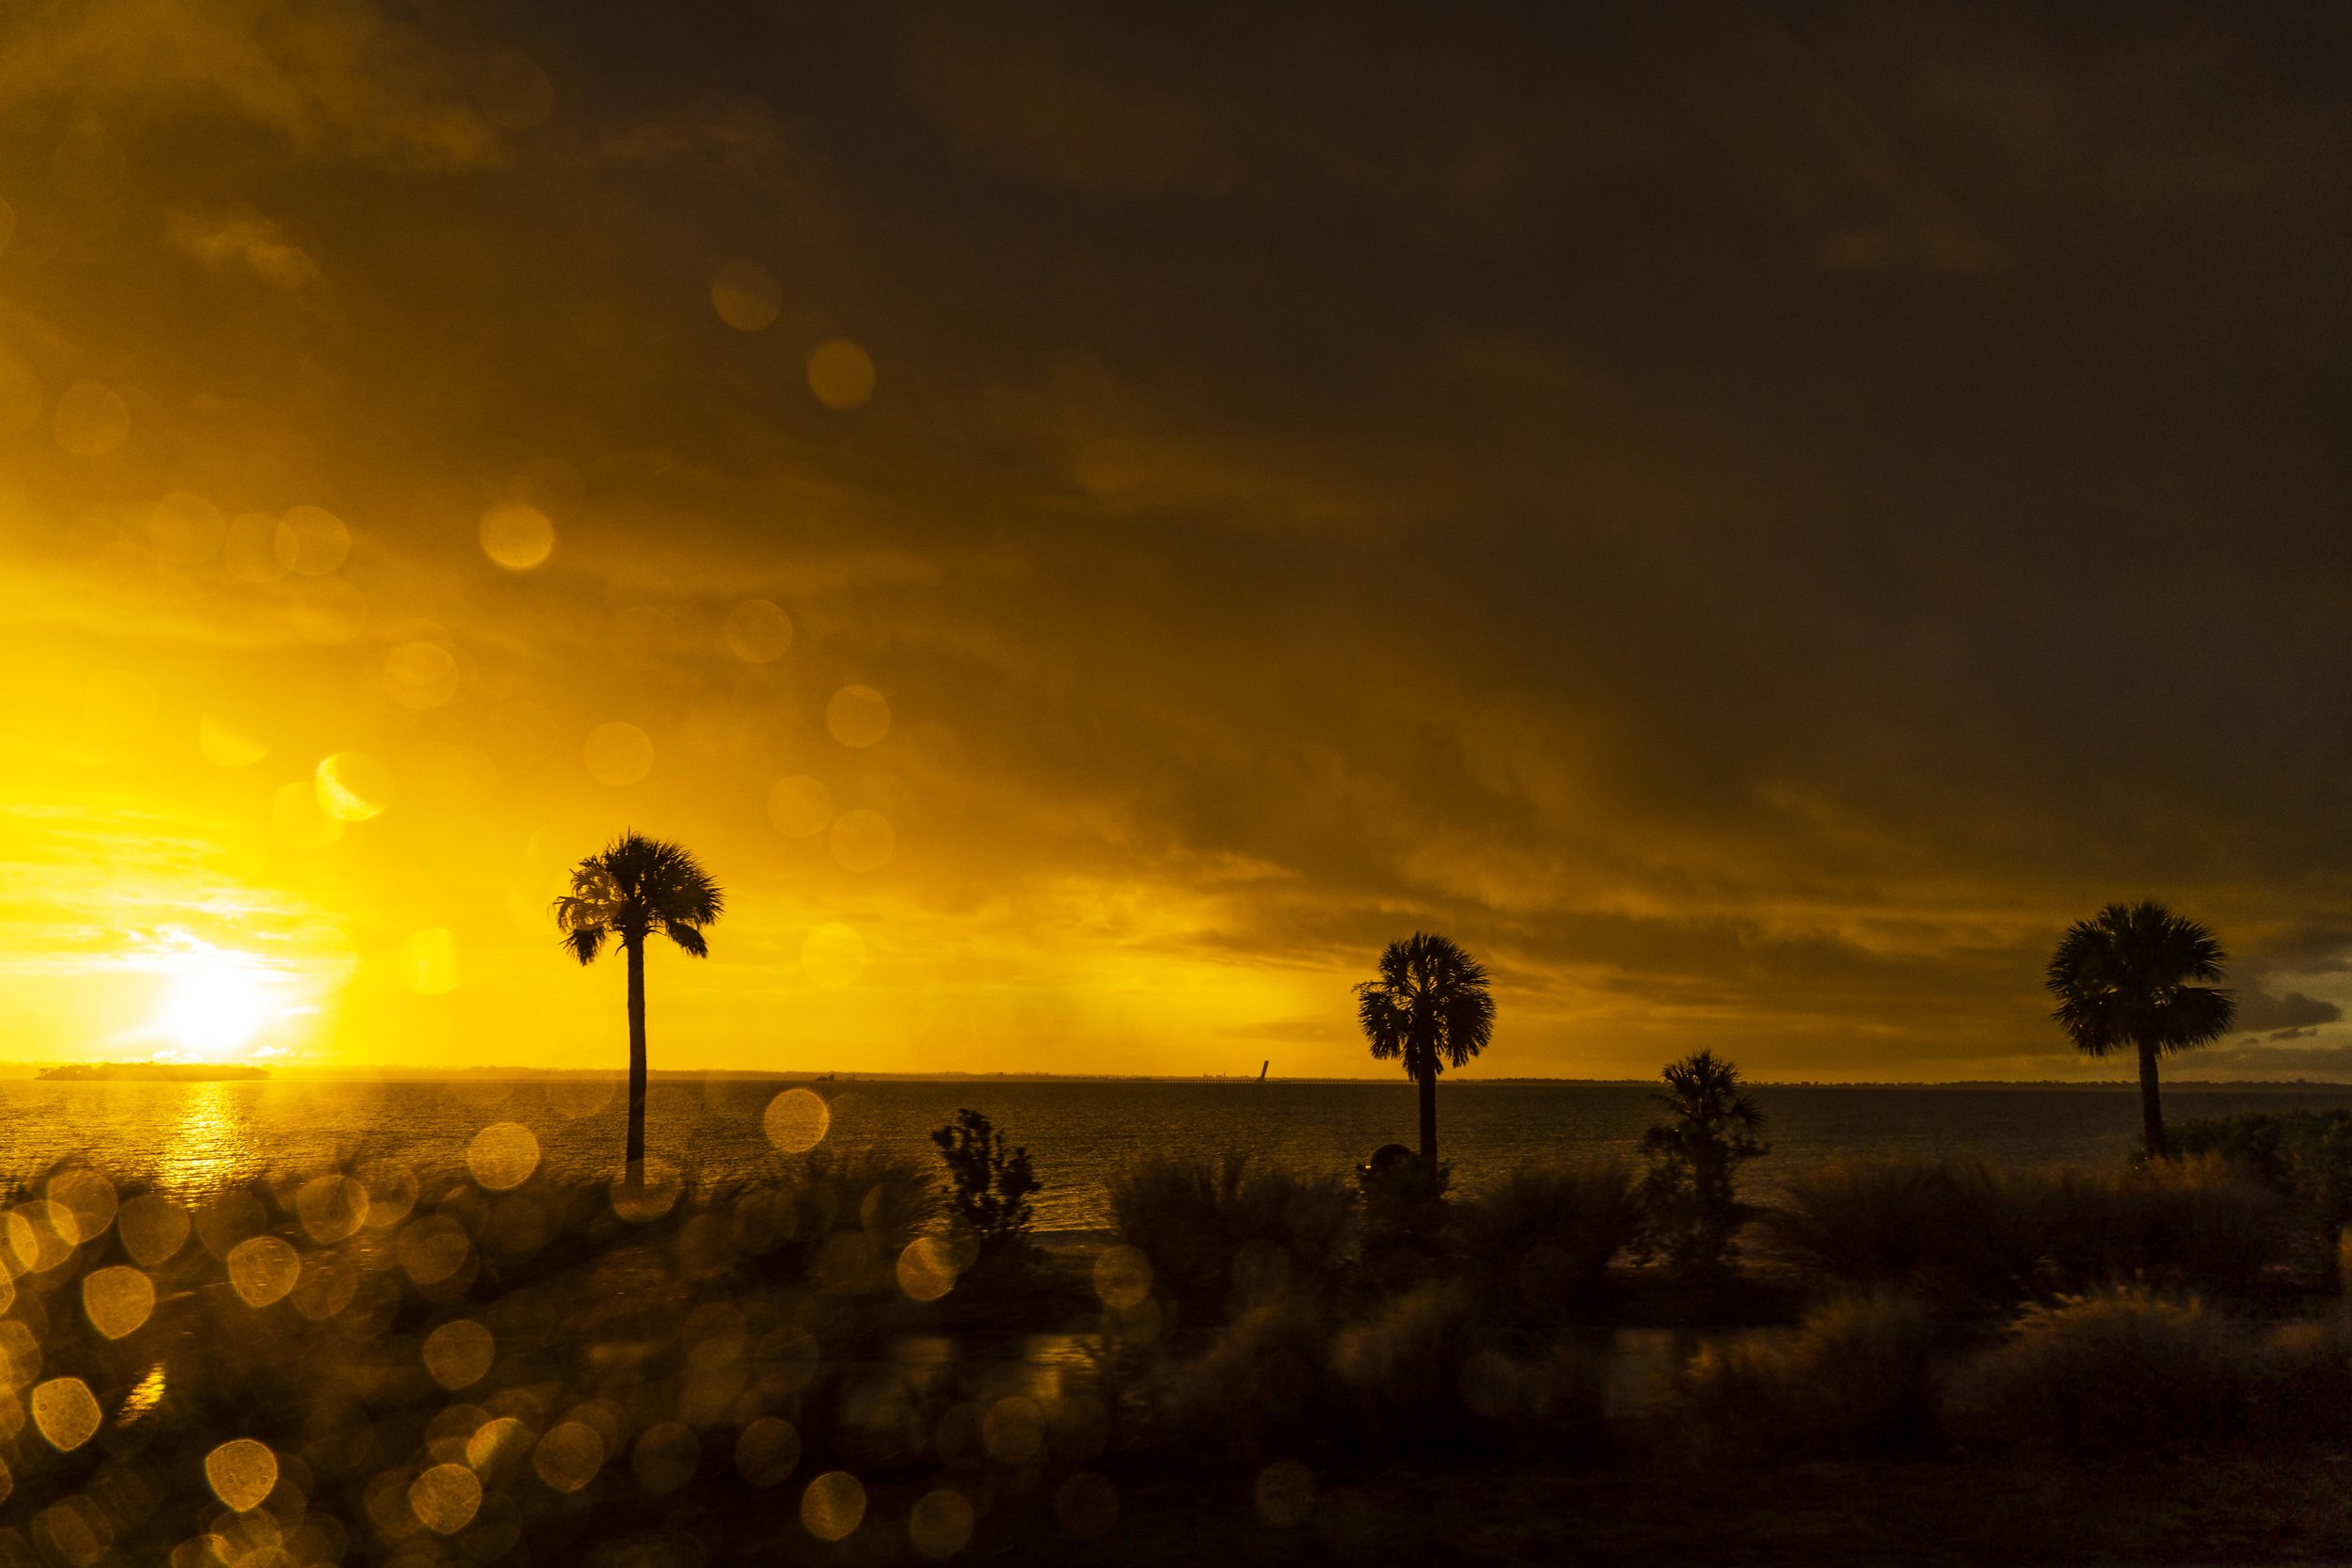  It’s hot and muggy in this summer sunset scene showing “That Florida Feeling.” 